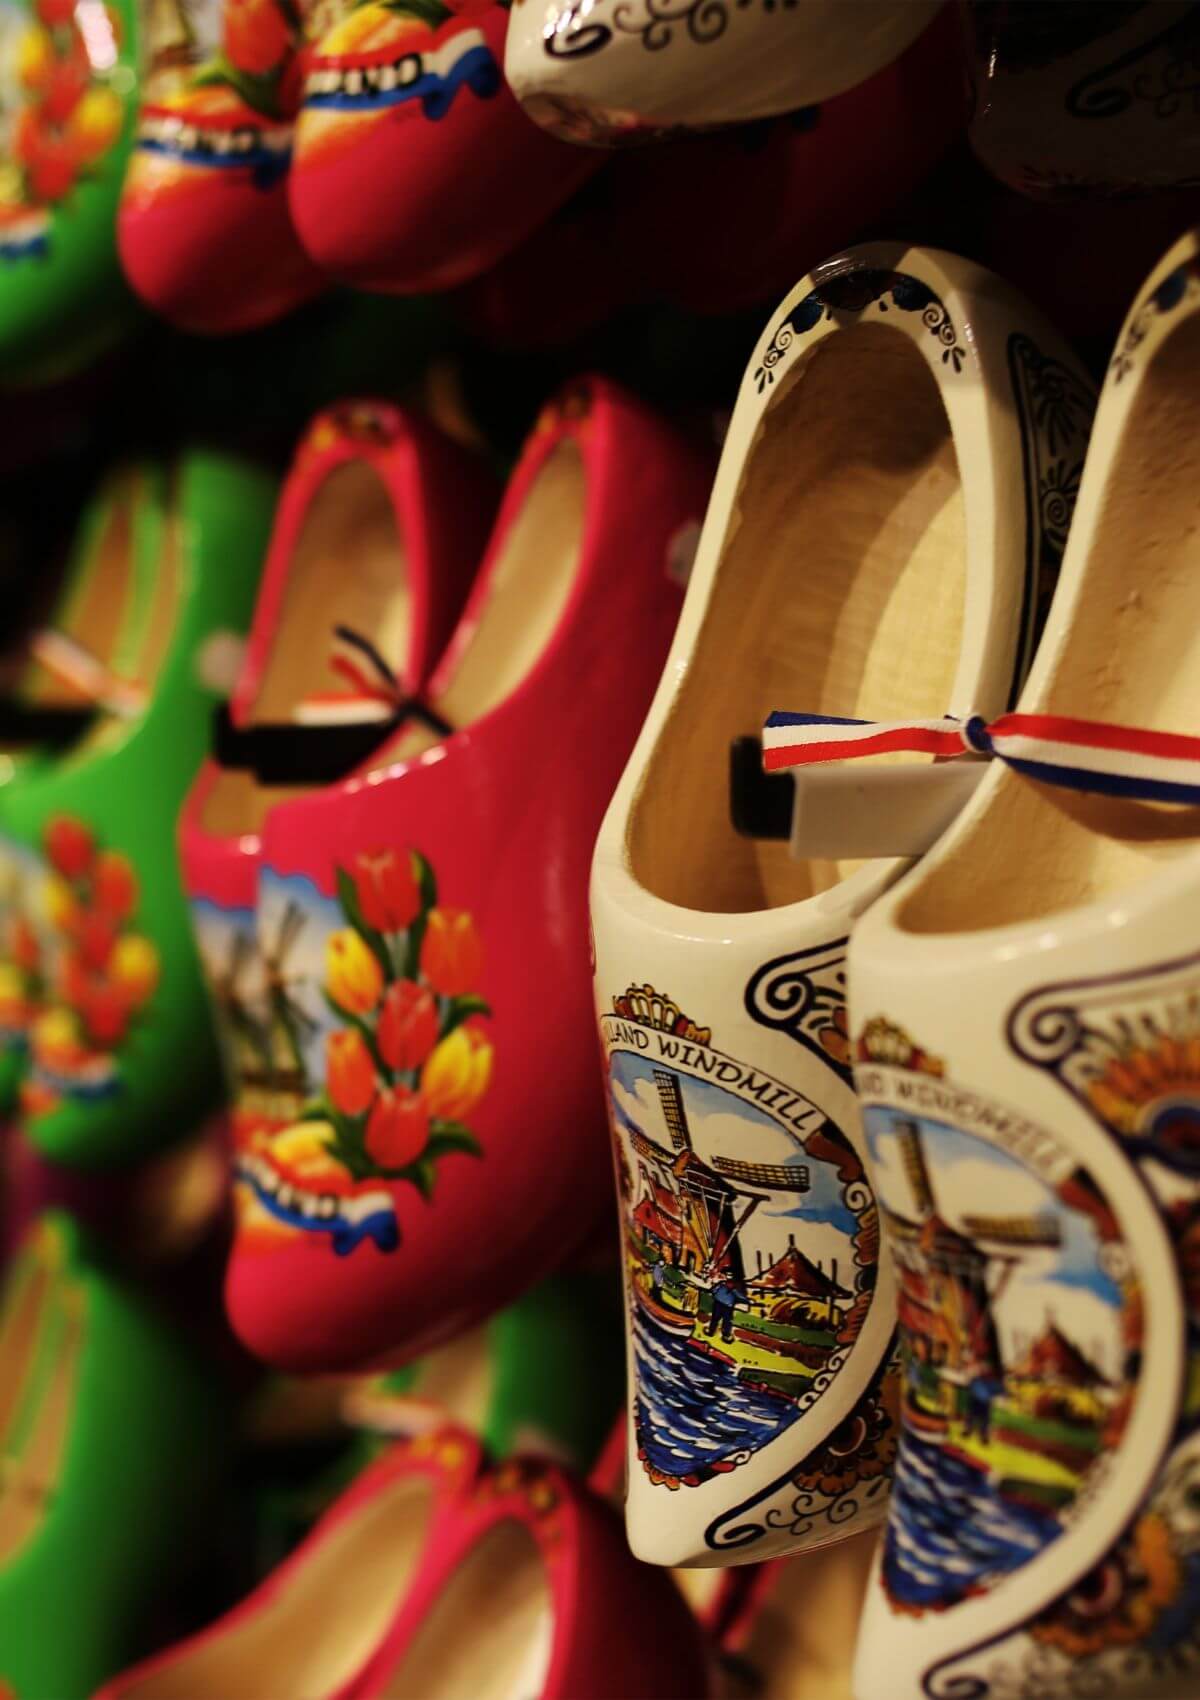 Wooden clogs are authentic souvenirs from Amsterdam